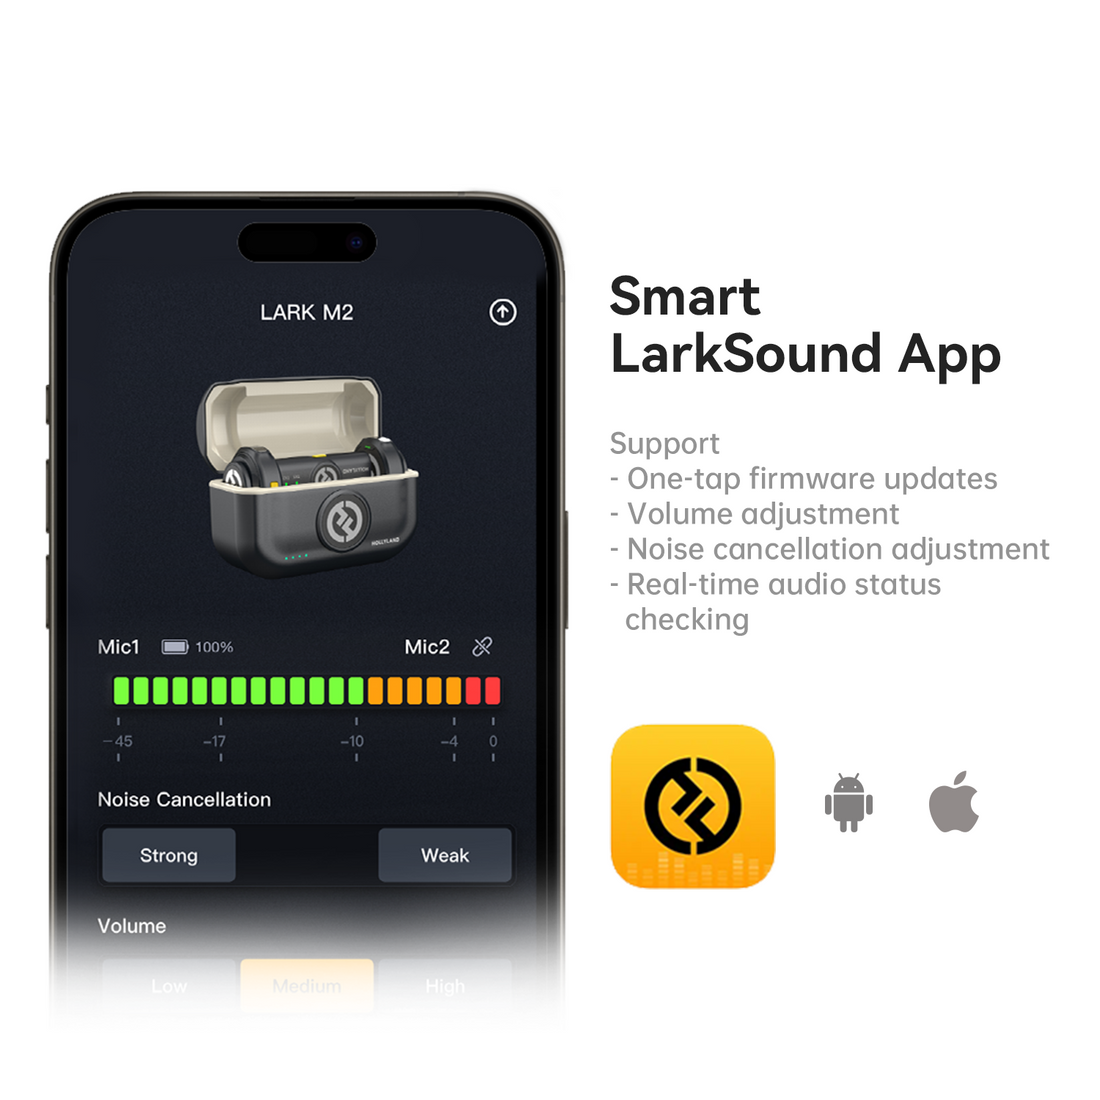 The Hollyland Lark M2 Wireless Mic is the Size of a Button